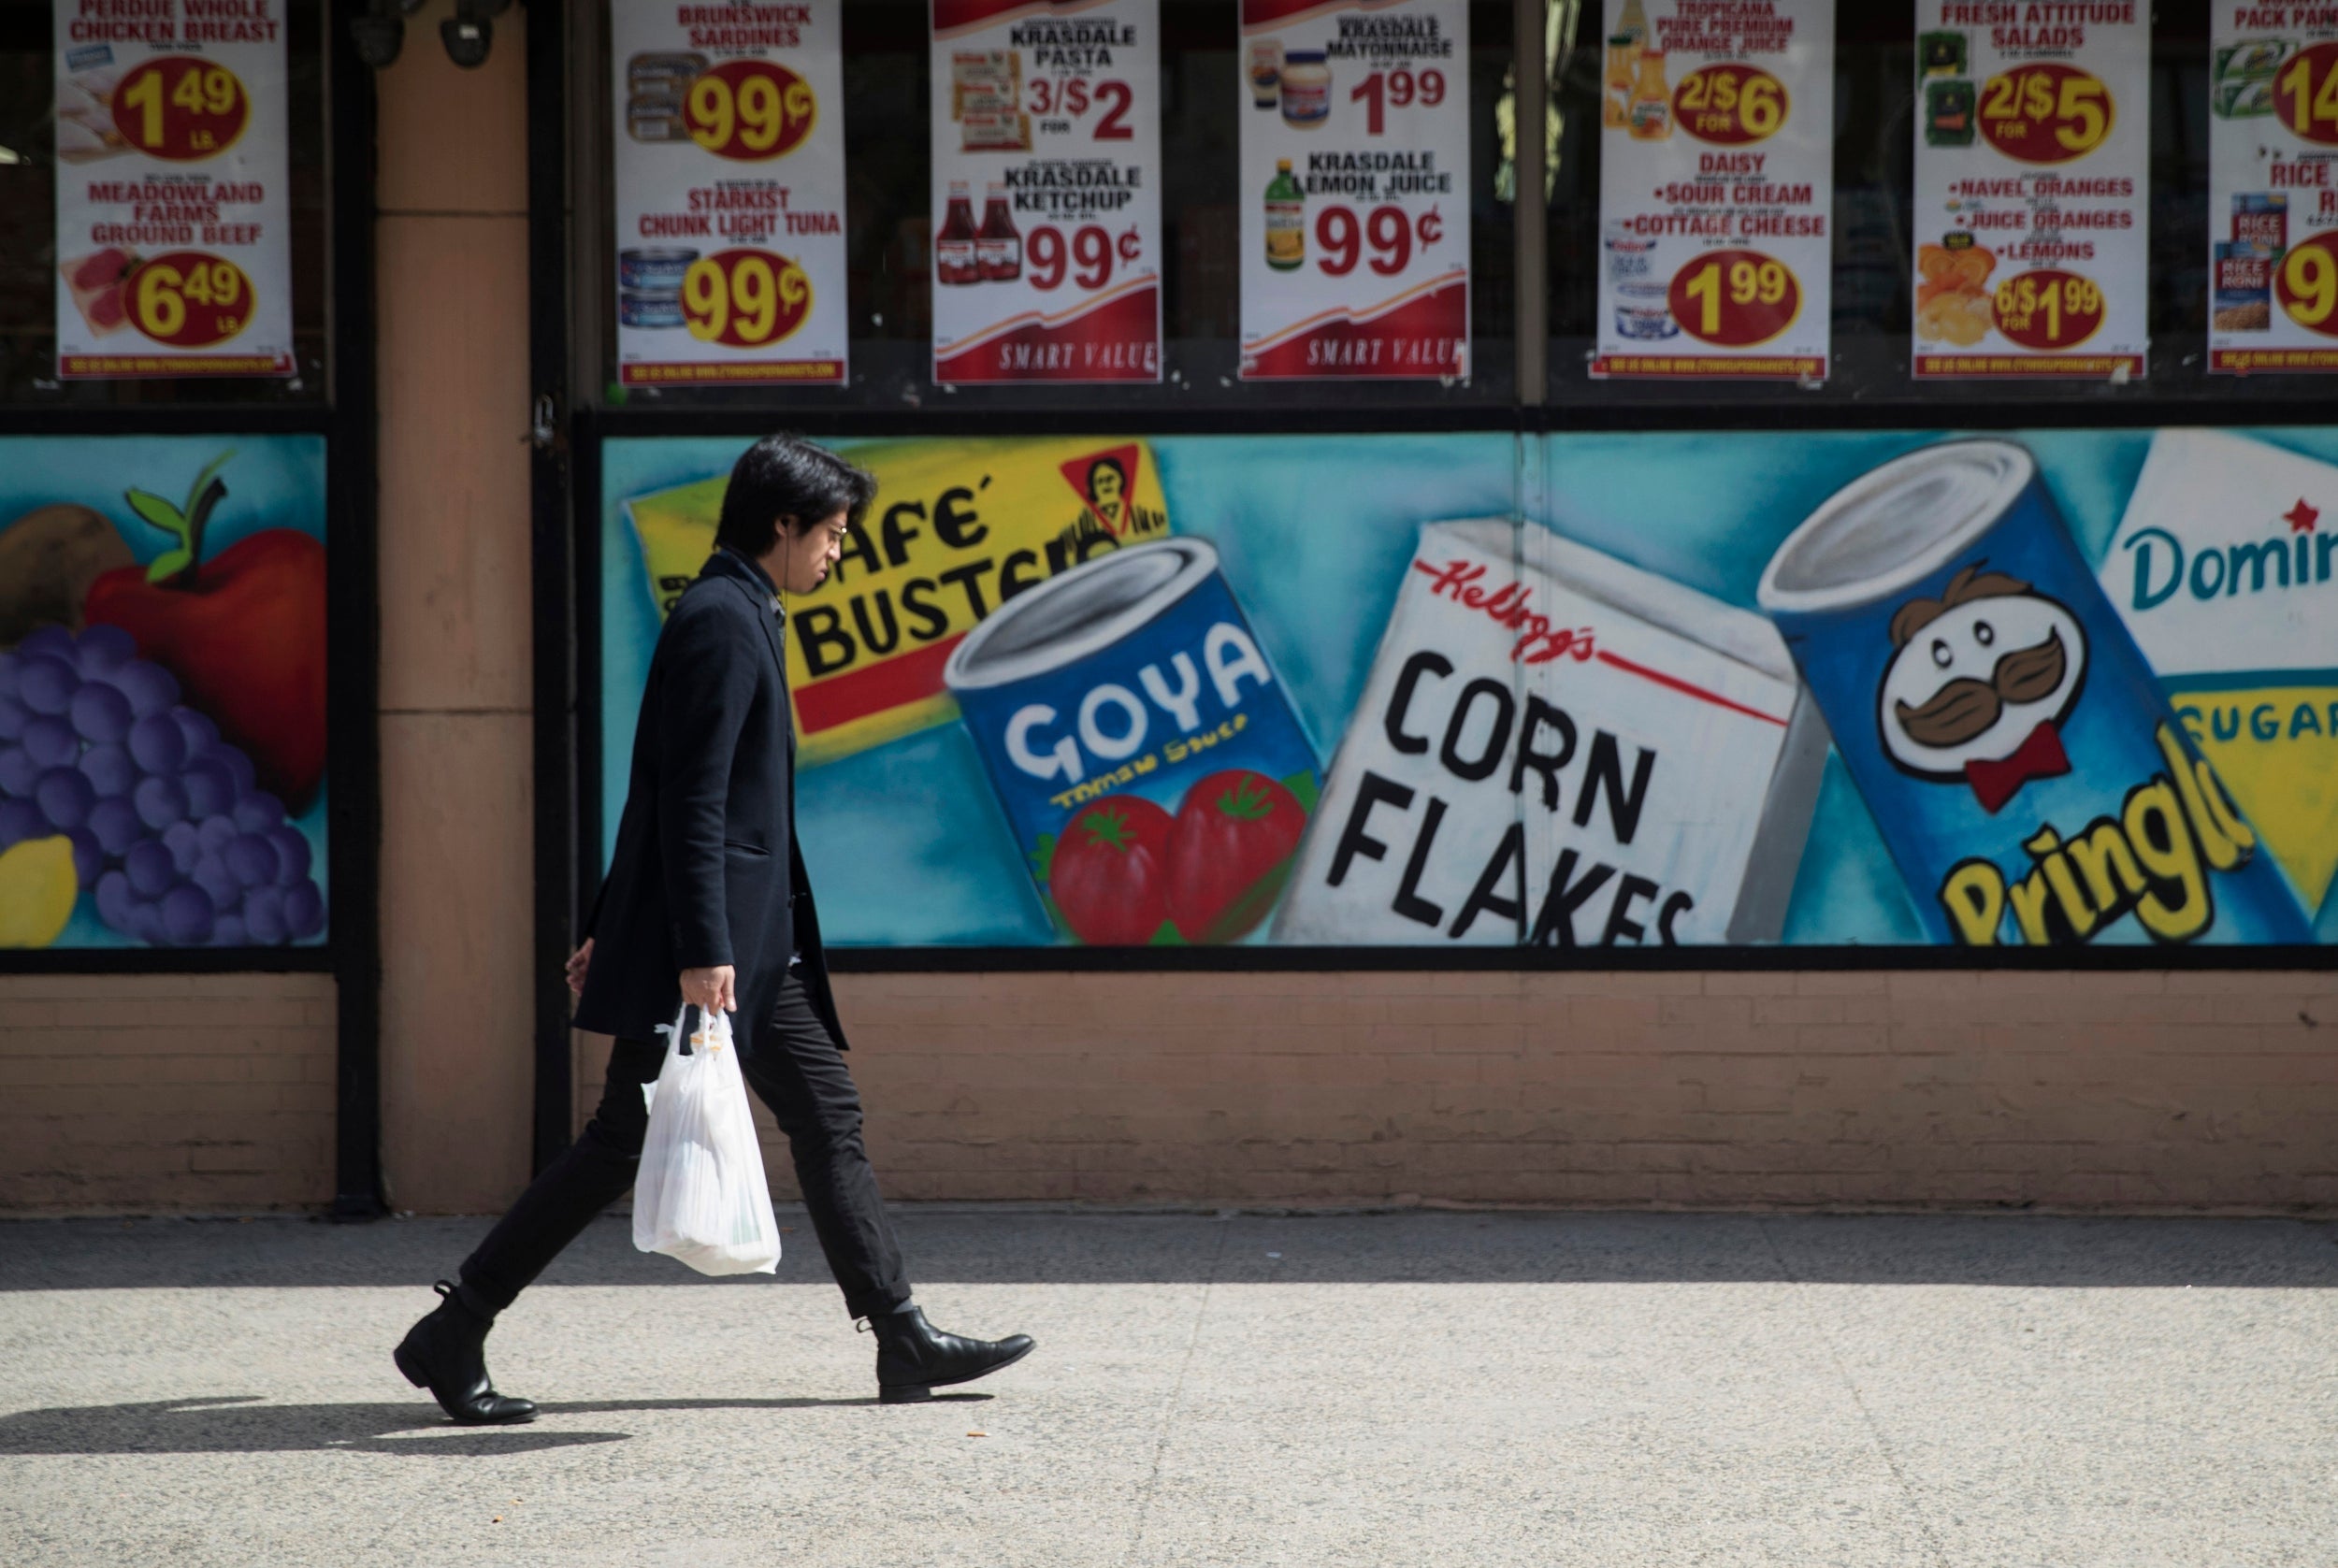 A man walking past a supermarket in East Village, Manhattan. New York is banning single-use plastic bags